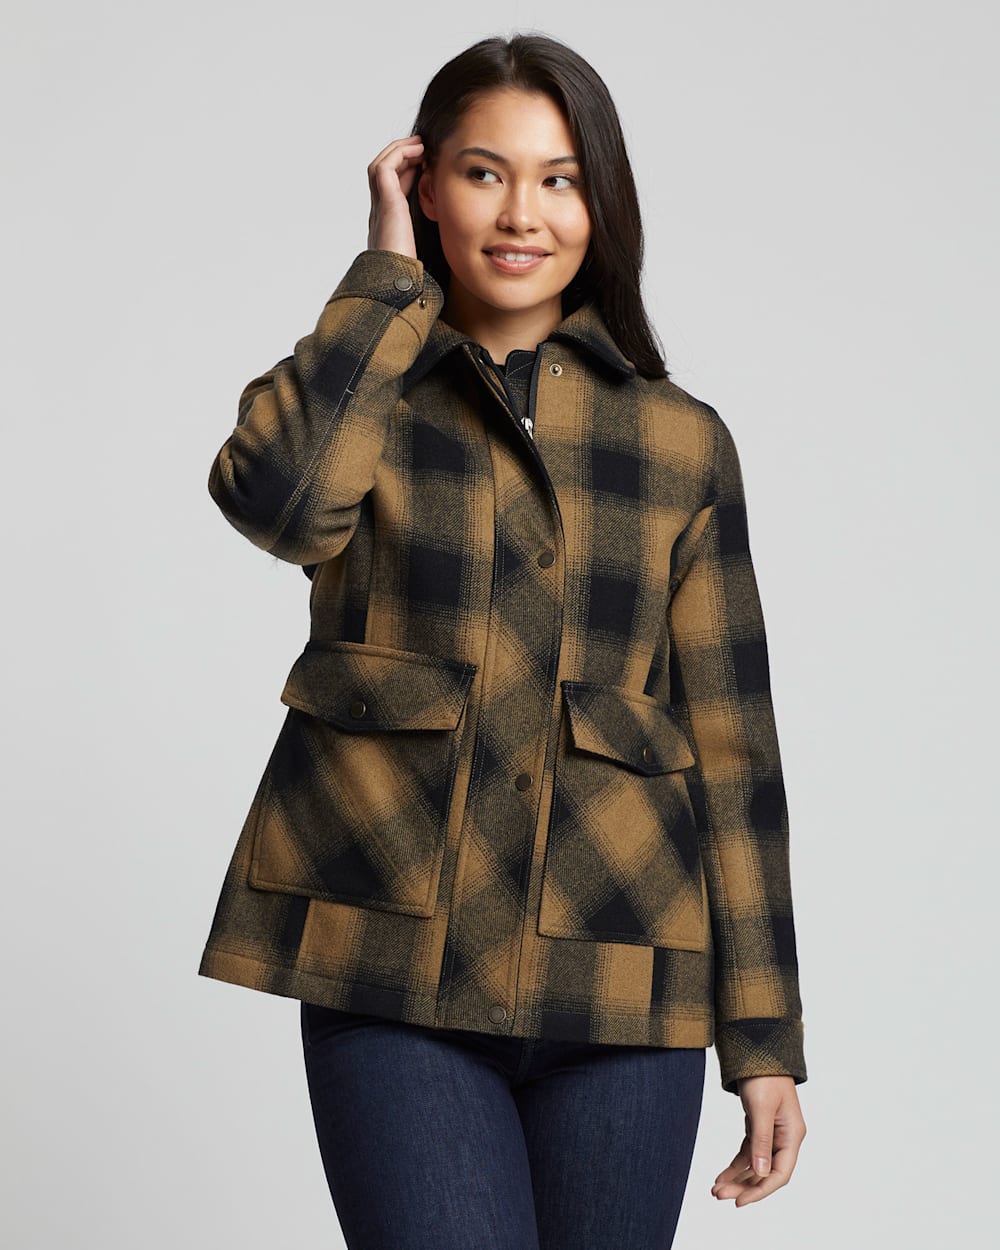 WOMEN'S STANFORD BOXY BOMBER JACKET IN CAMEL/BLACK BUFFALO CHECK image number 1